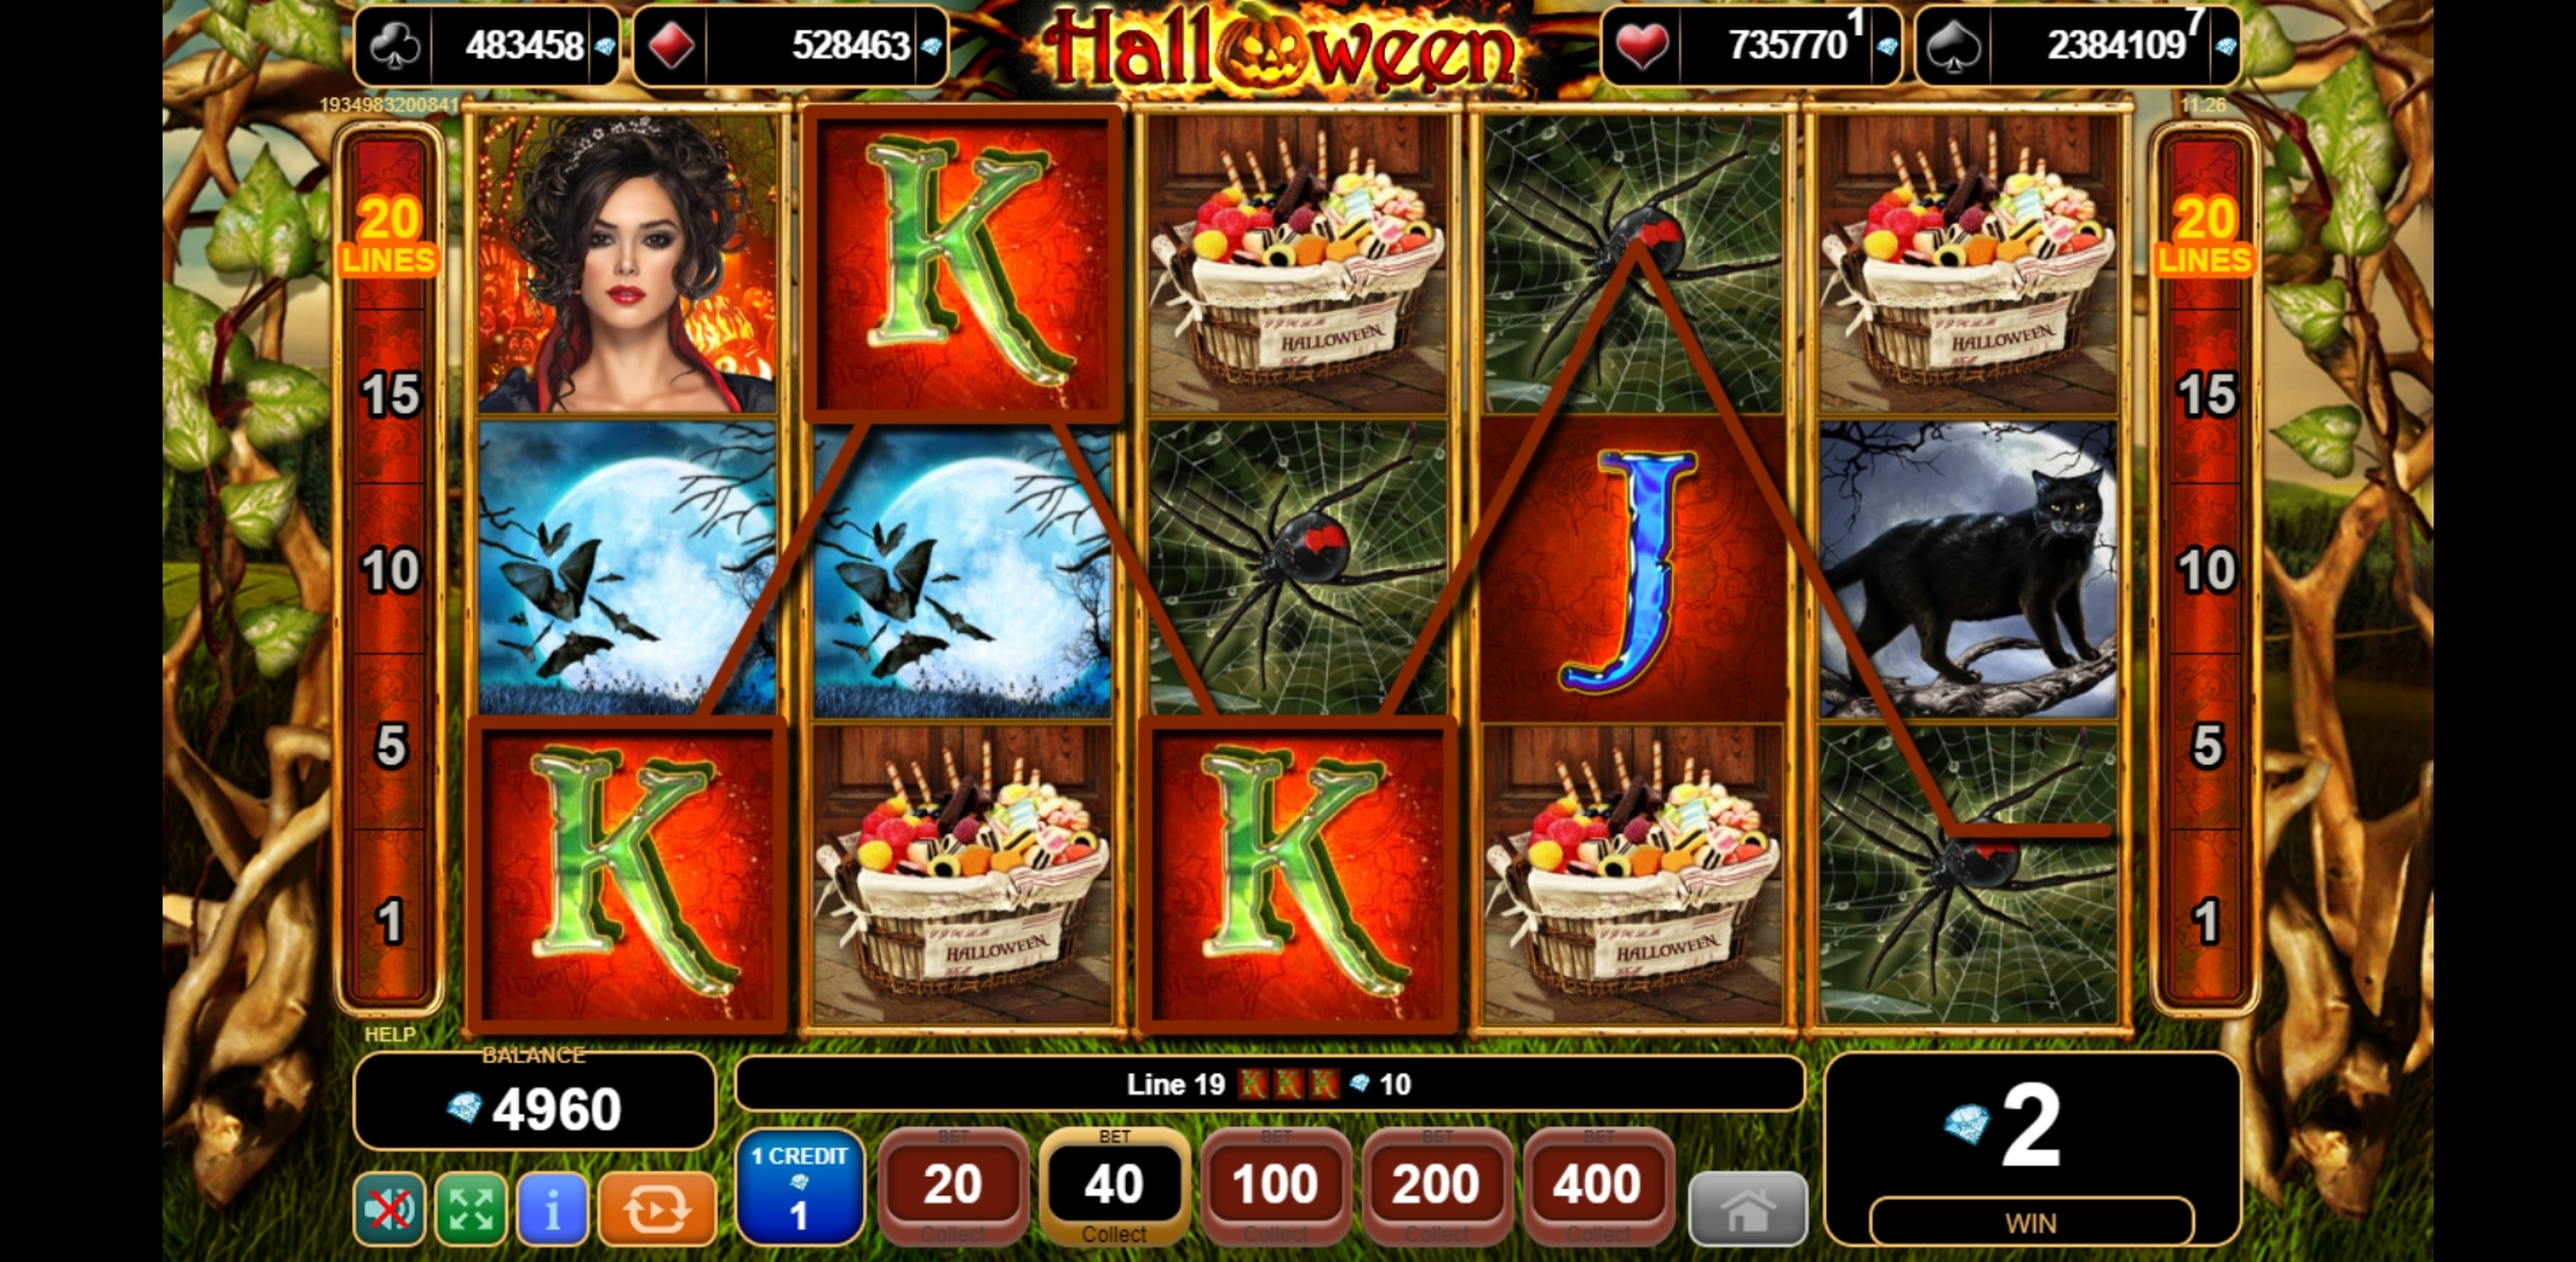 Win Money in Halloween Free Slot Game by EGT